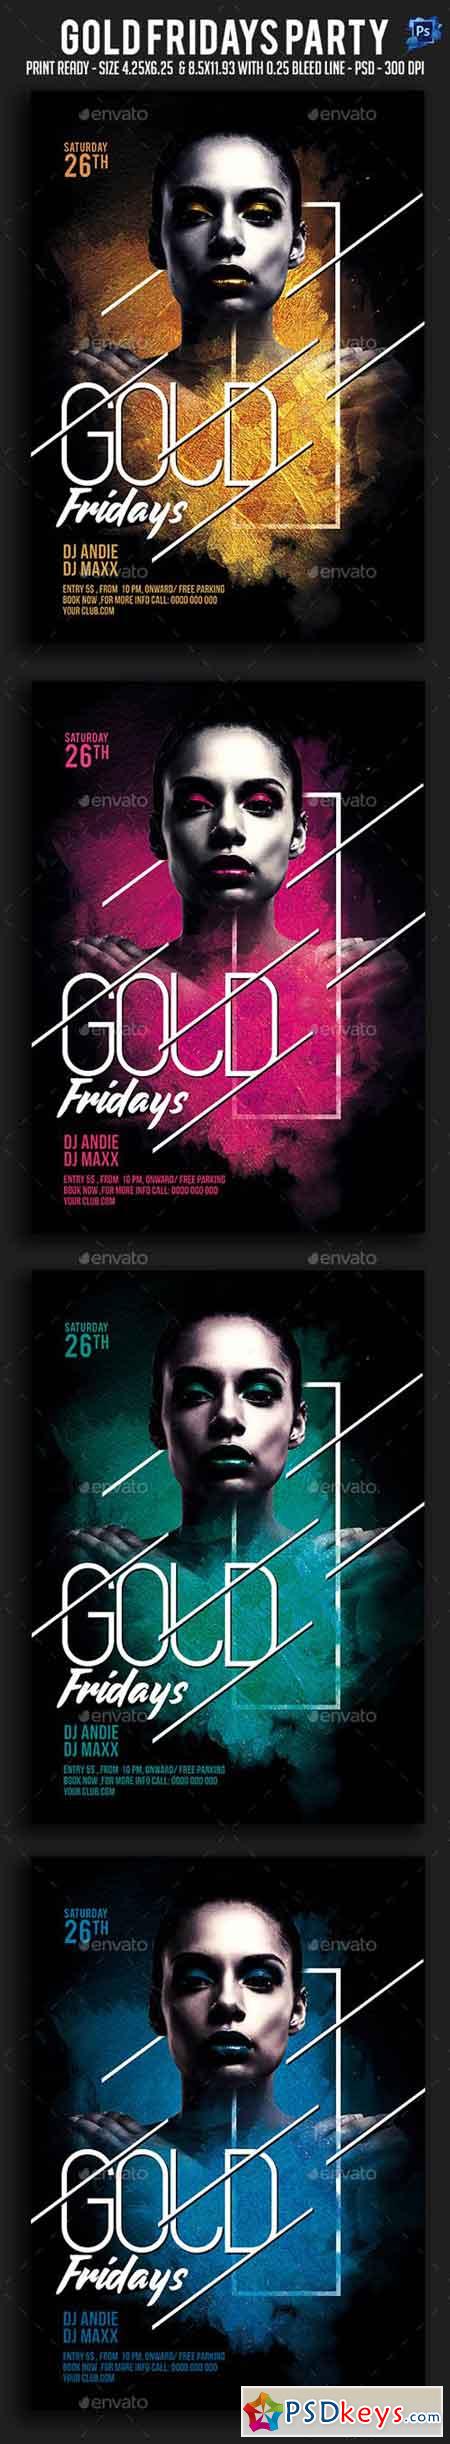 Gold Fridays Party Flyer 20693654